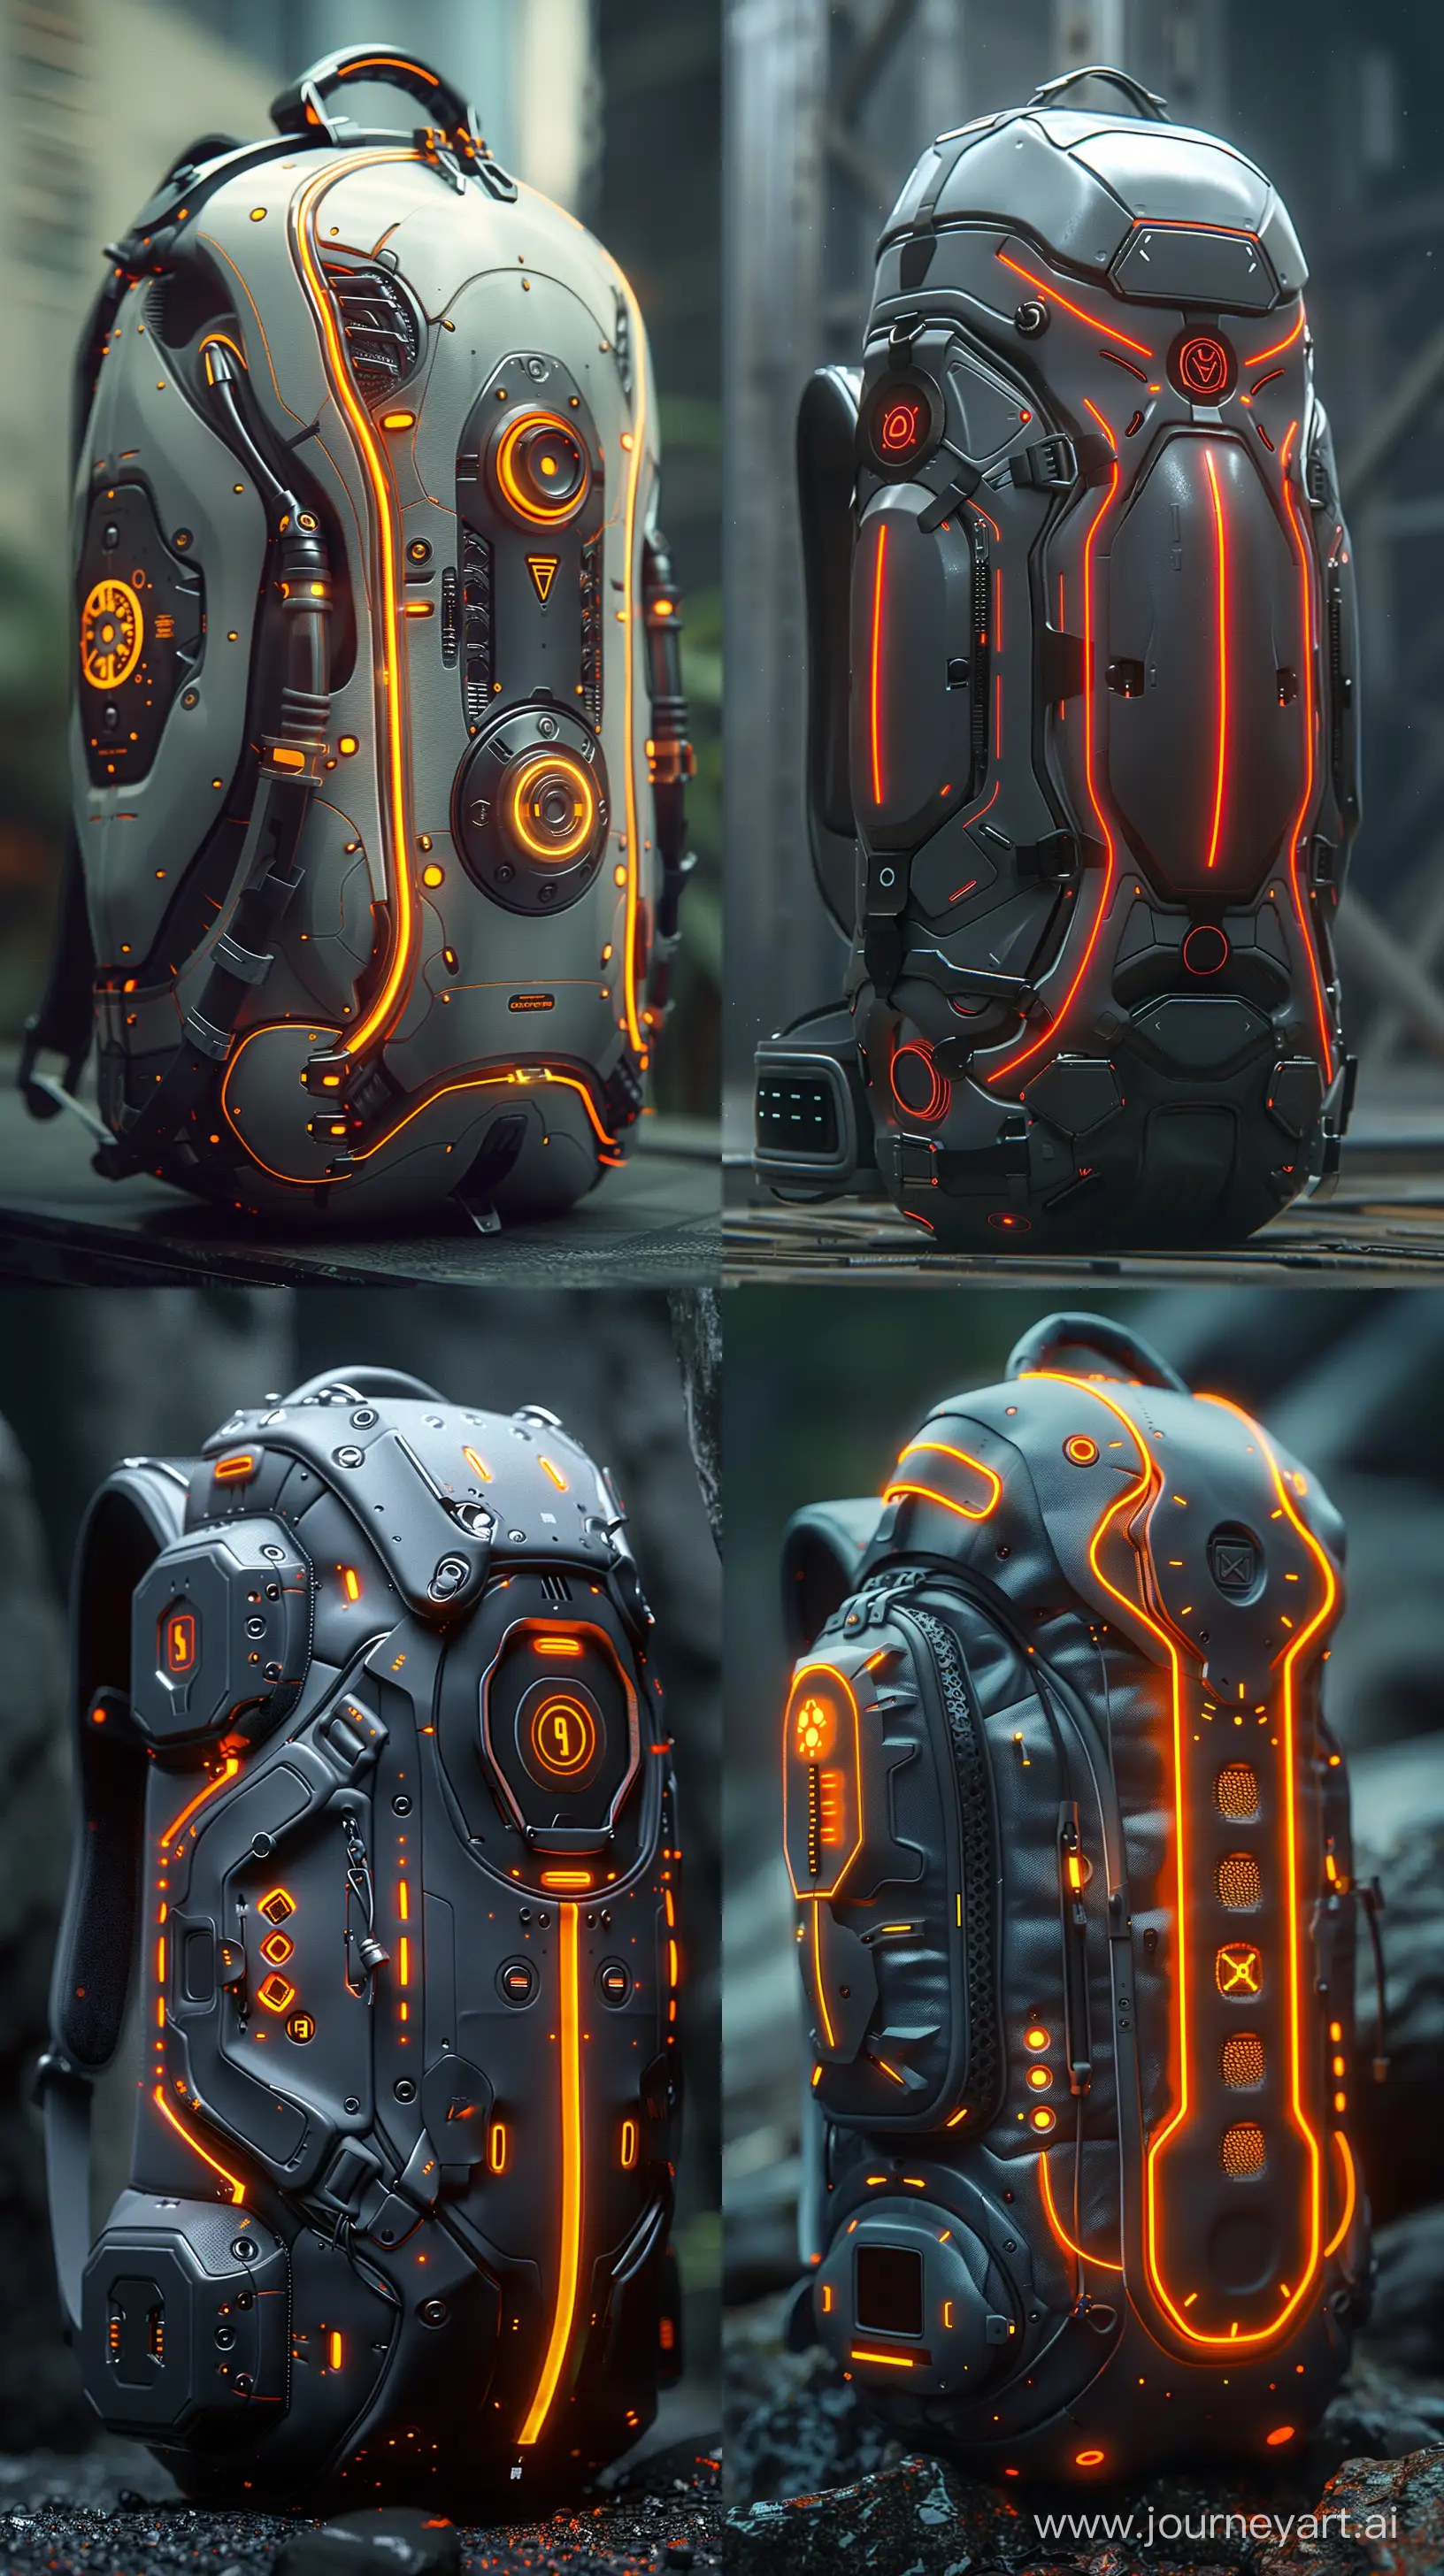 Futuristic-HighTech-Backpack-with-Badge-Octane-Render